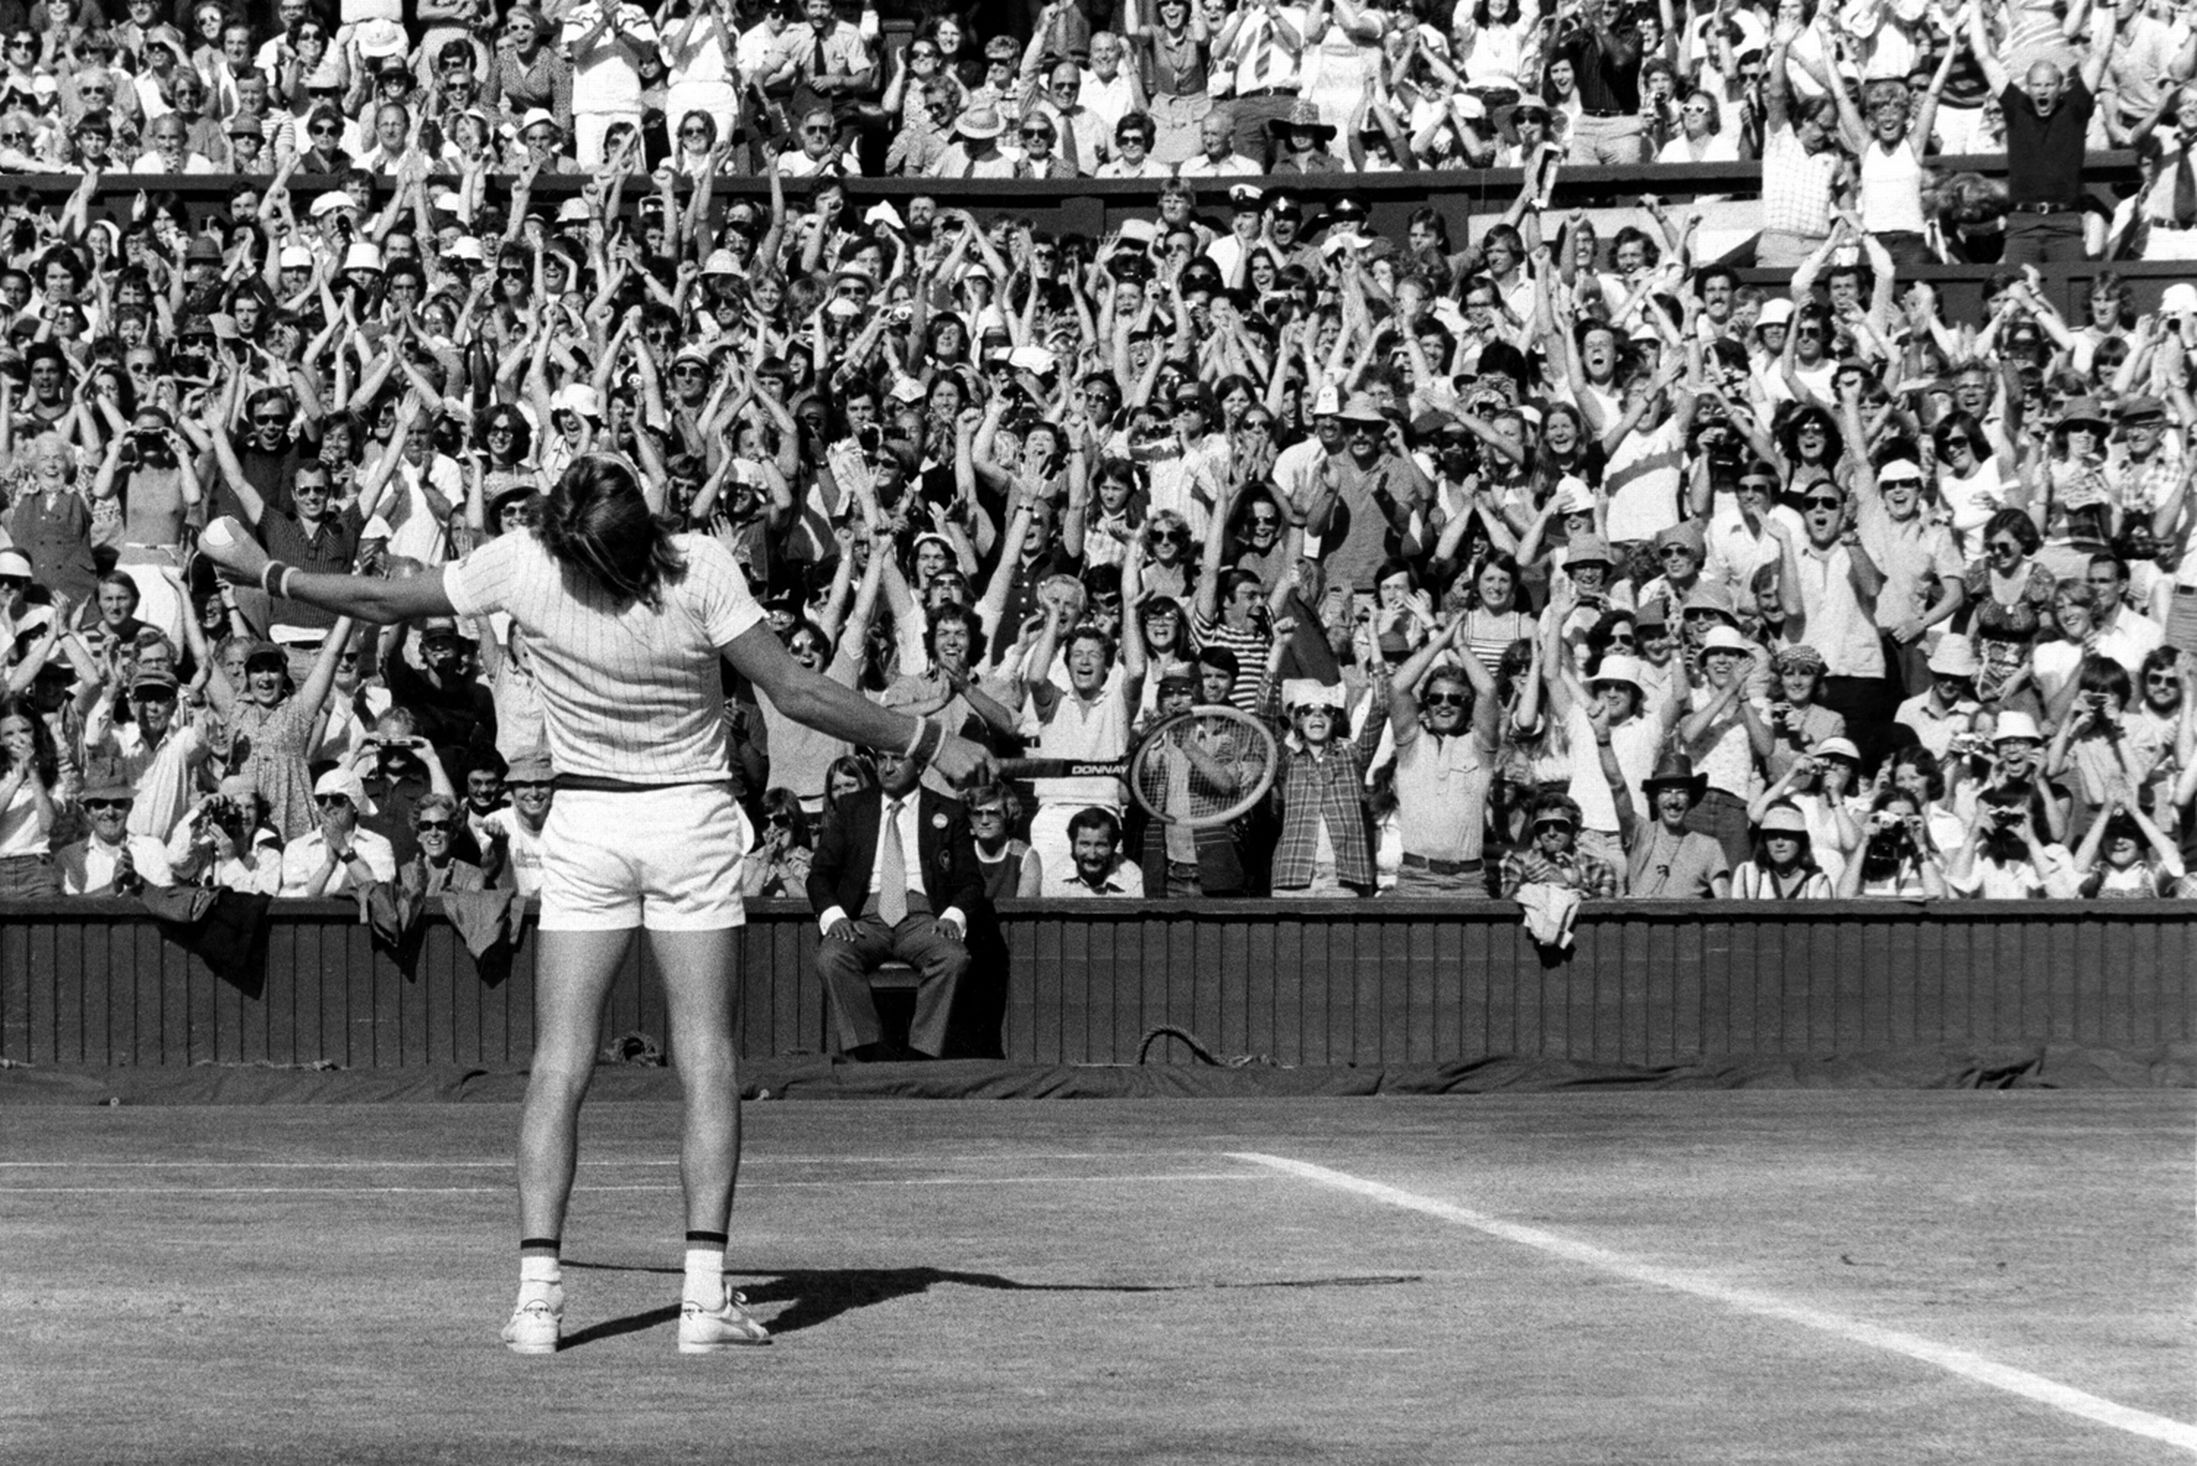 Most Iconic Sports Photos Björn Borg - Final of the 1977 Wimbledon Championships